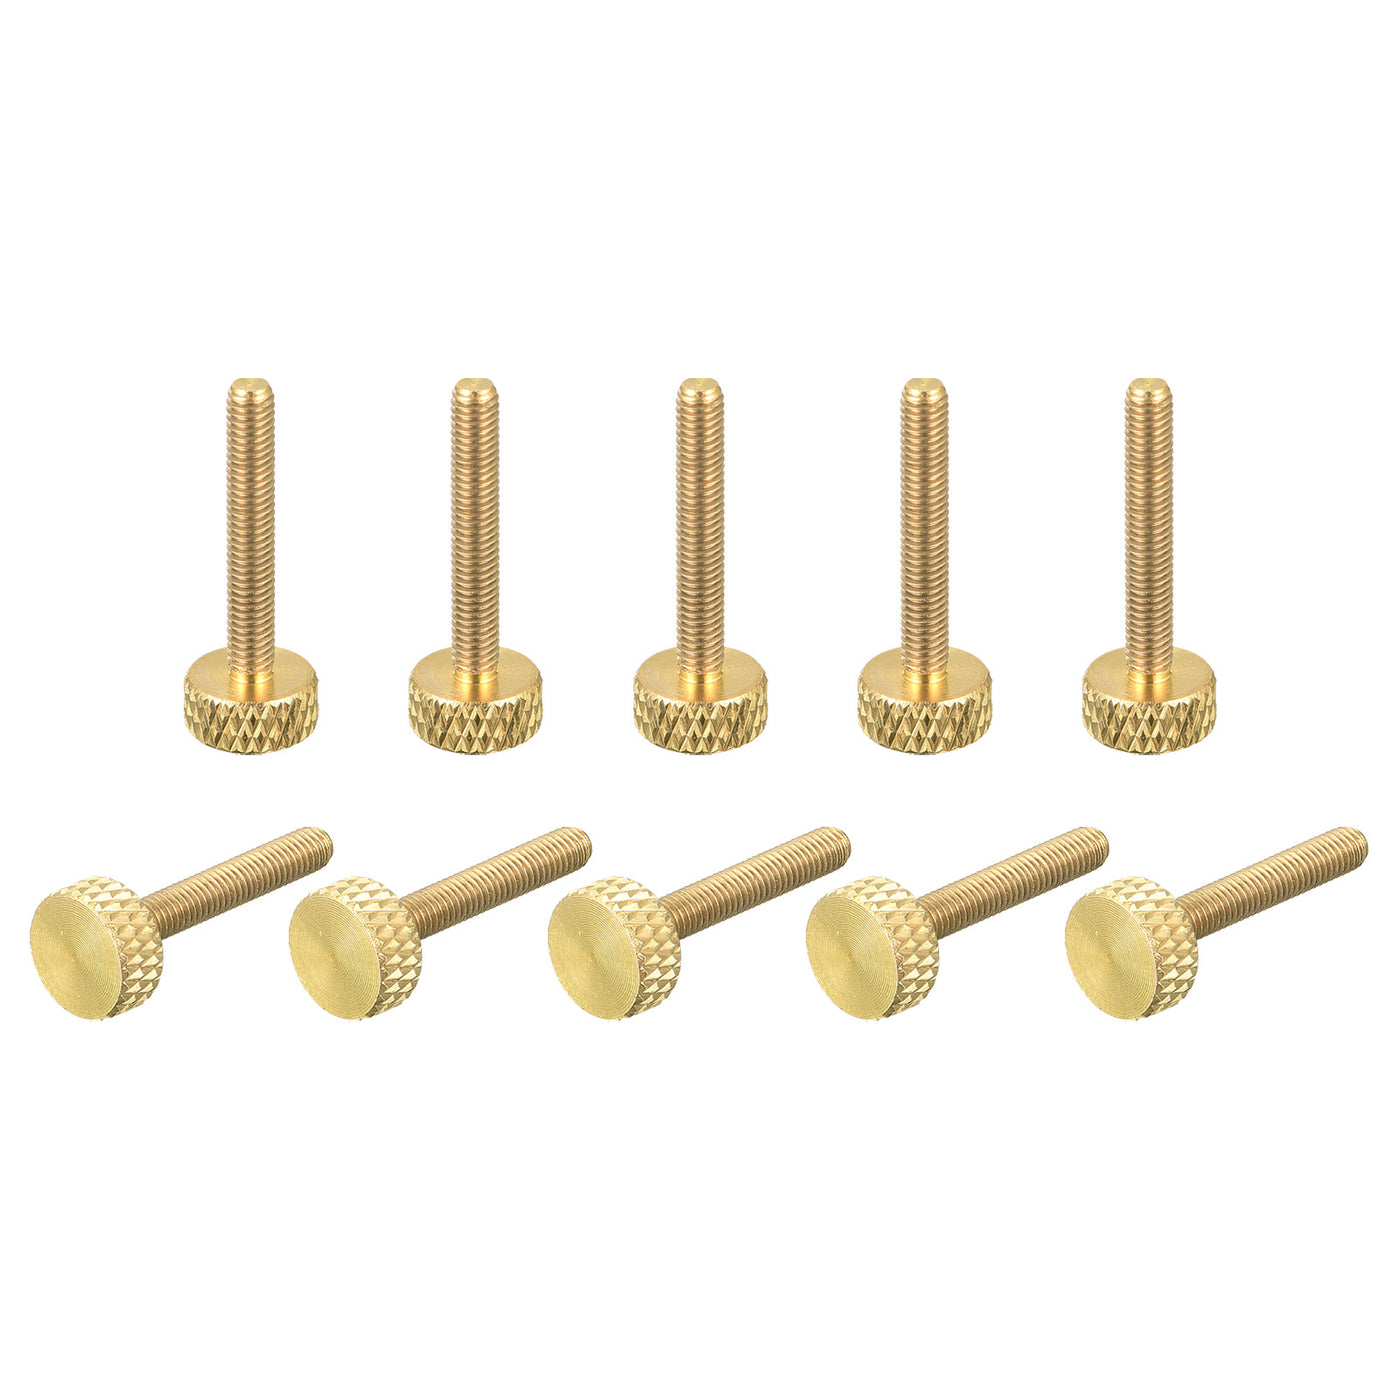 uxcell Uxcell 10Pcs Brass Knurled Thumb Screws, M3x20mm  Flat Grip Bolt Knobs Fasteners for Electronic, Mechanical